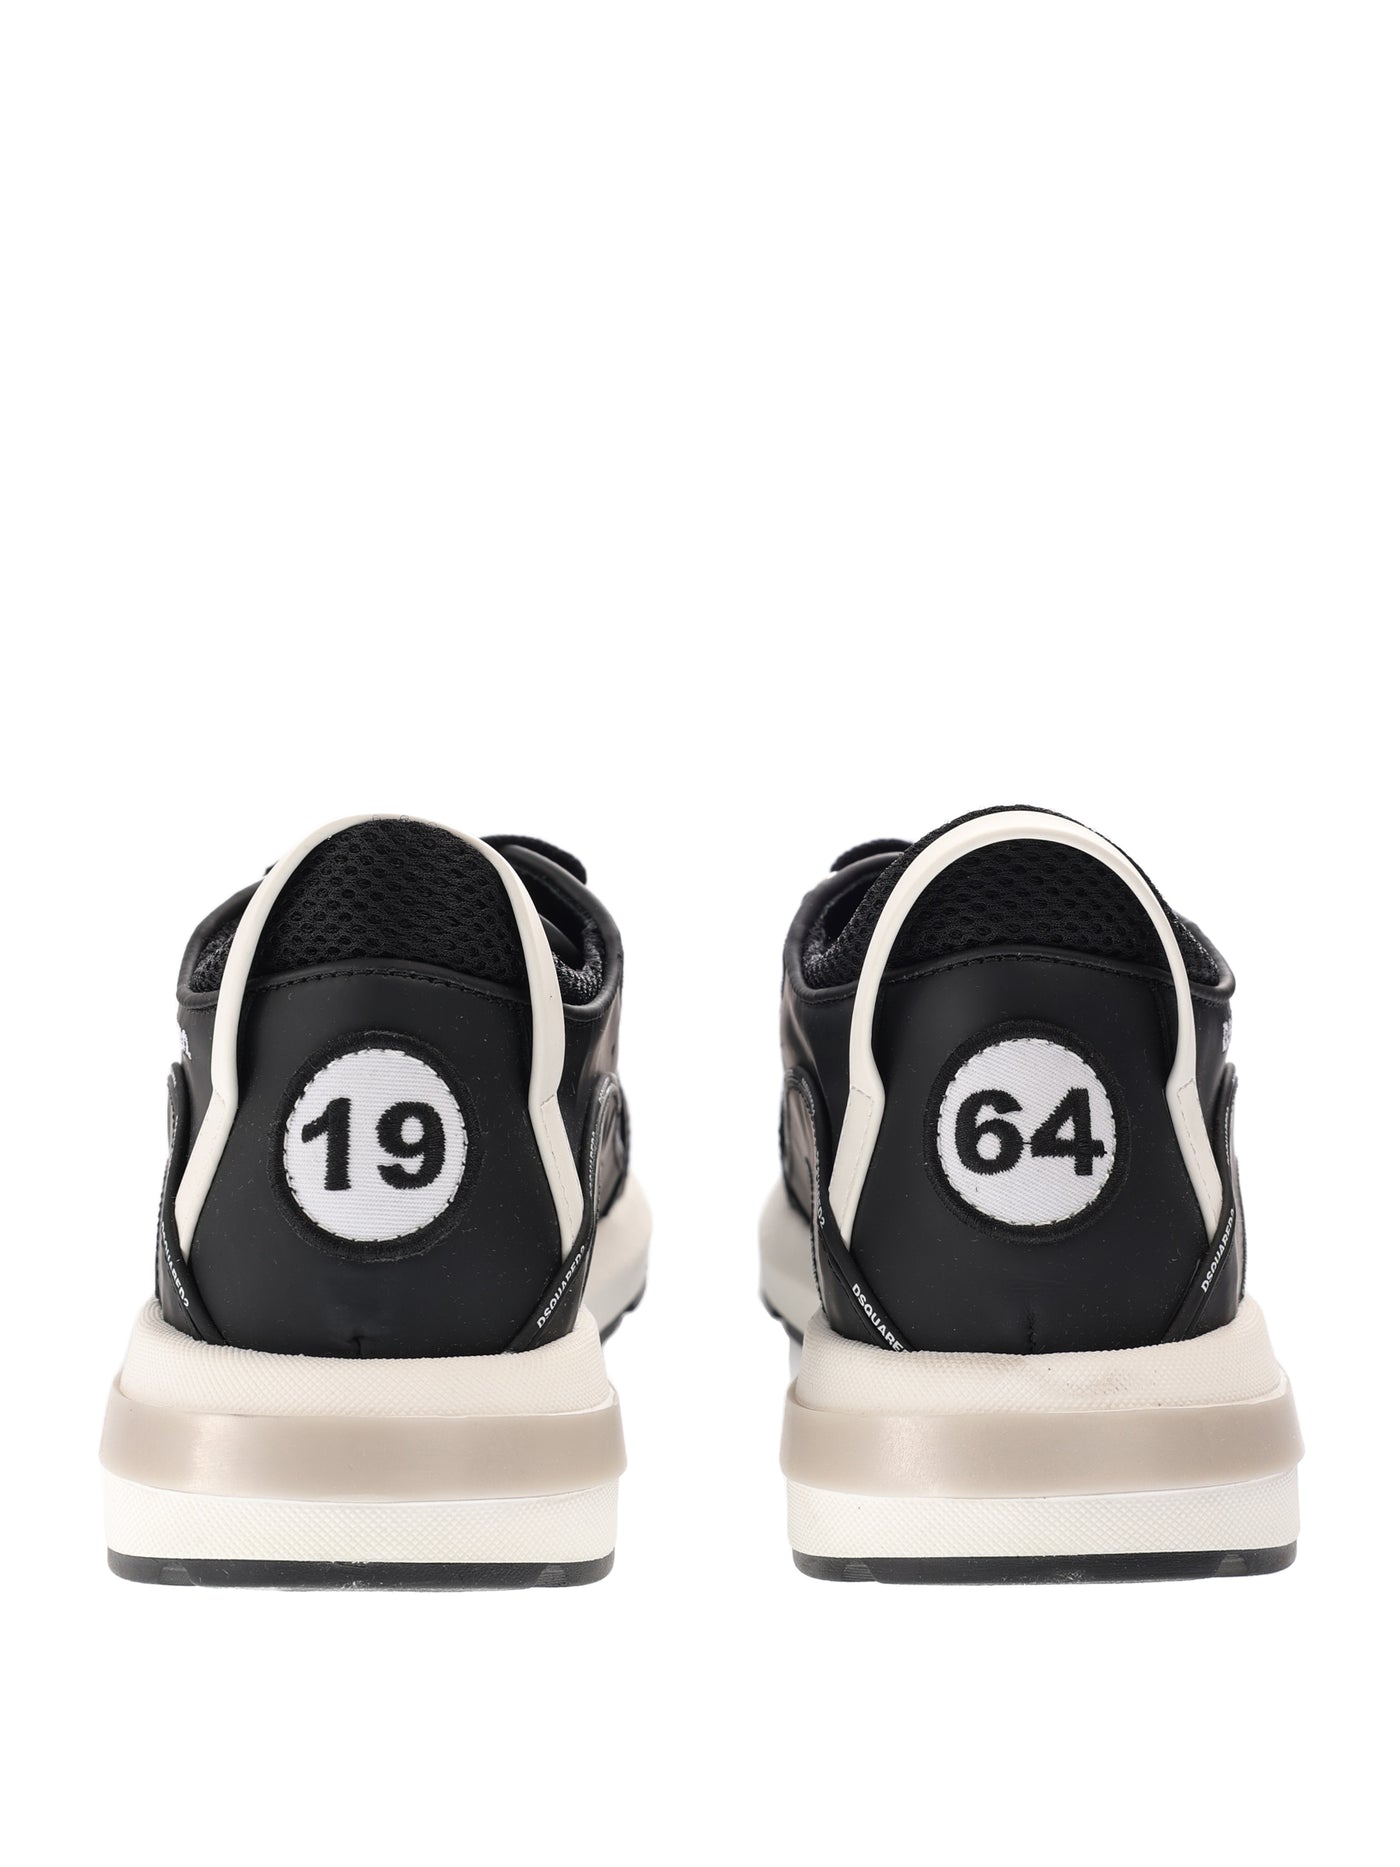 DSQUARED2 KIDS LEATHER SNEAKERS